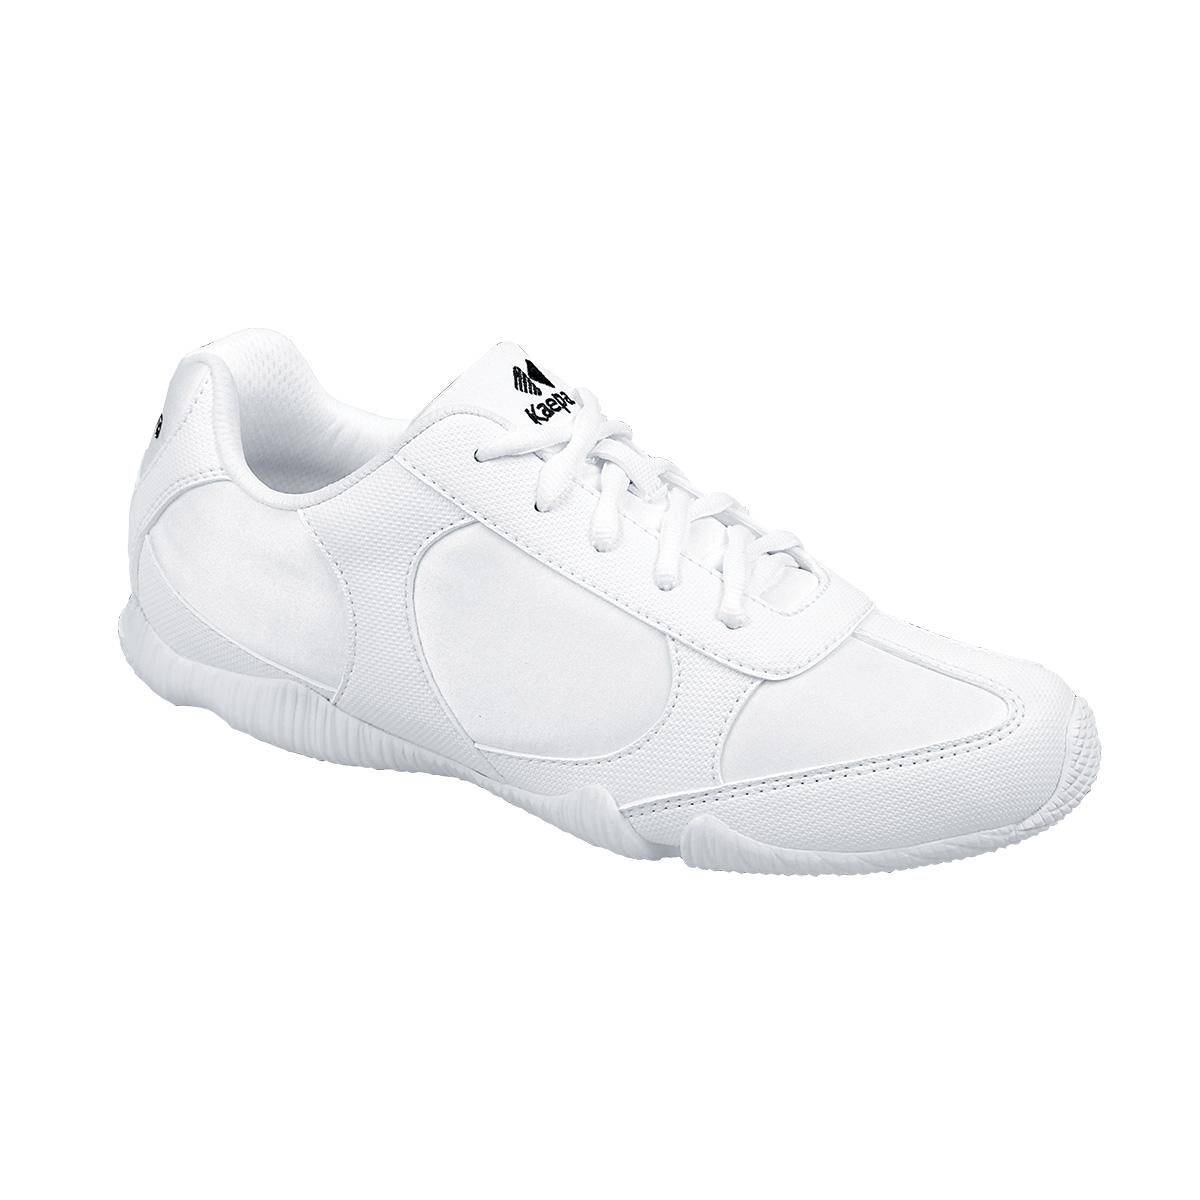 Kappa Cheer Shoes On Sale Up To 64 Off